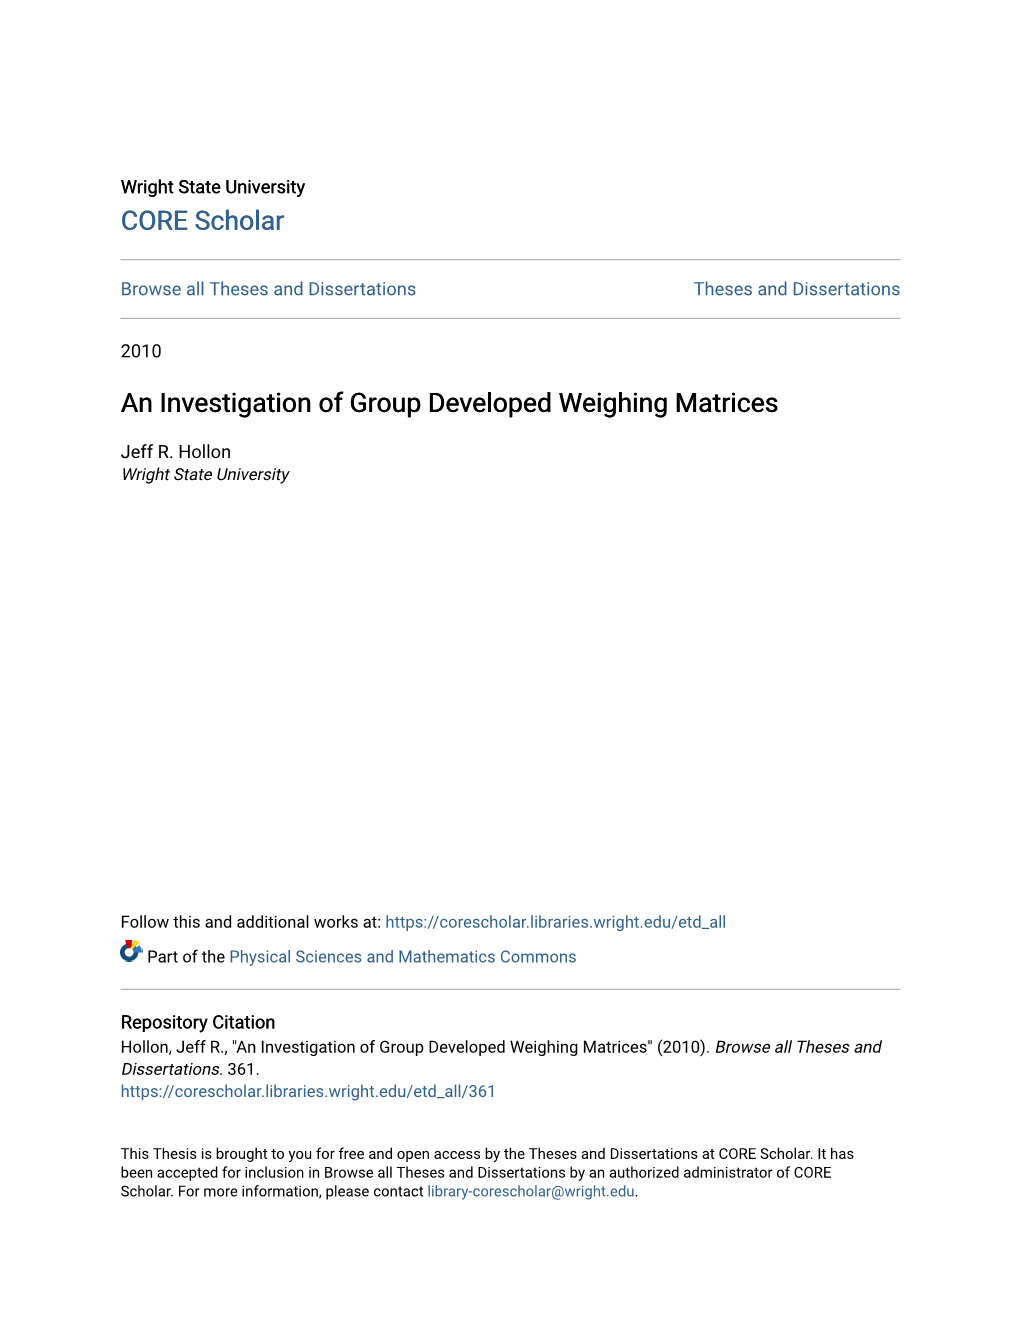 An Investigation of Group Developed Weighing Matrices